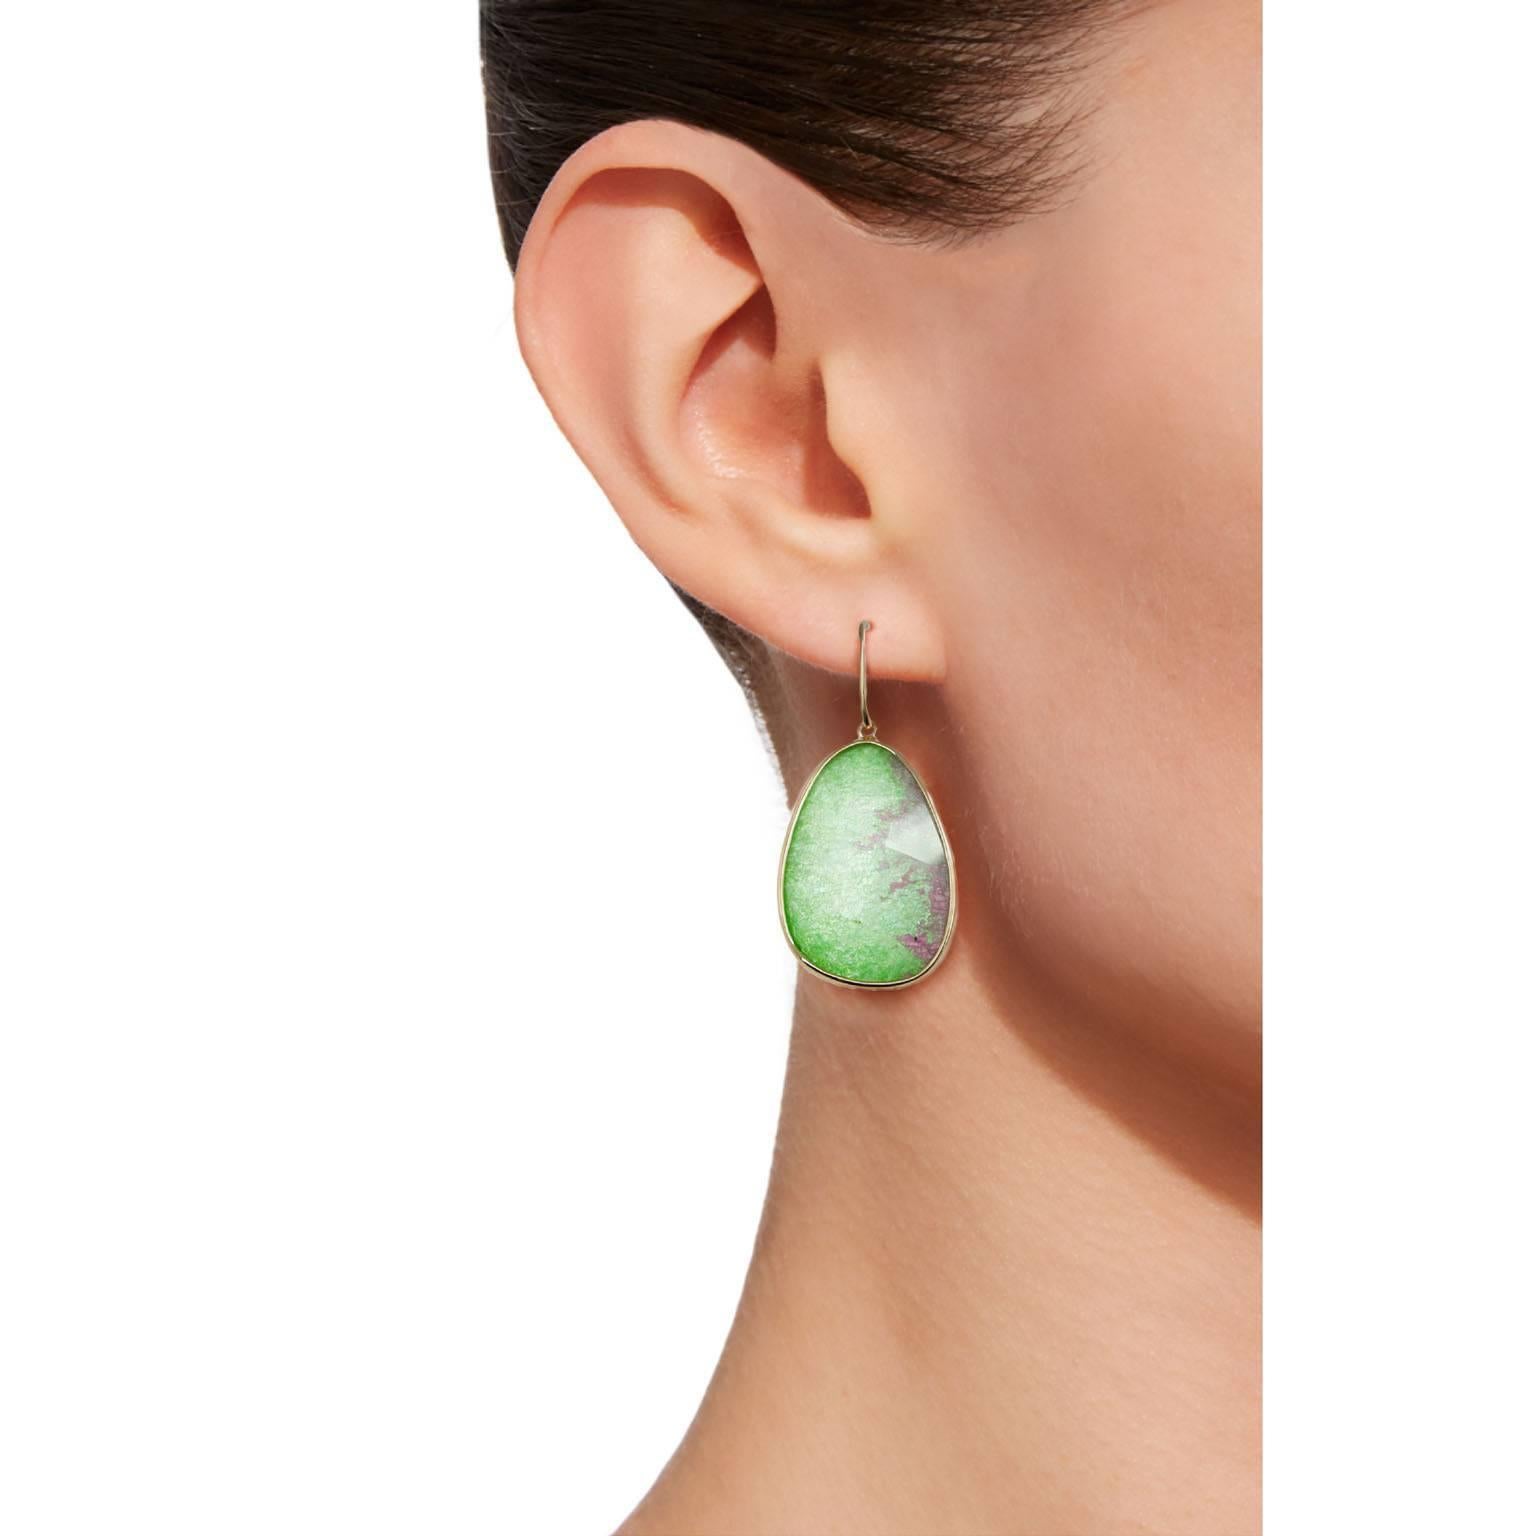 Jona design collection, hand crafted in Italy, 18 Karat yellow gold drop earrings set with a crazy cut Quartz over Zoisite and Mother of Pearl, weighing 28.47 carats. Clips can be mounted upon request.

All Jona jewelry is new and has never been